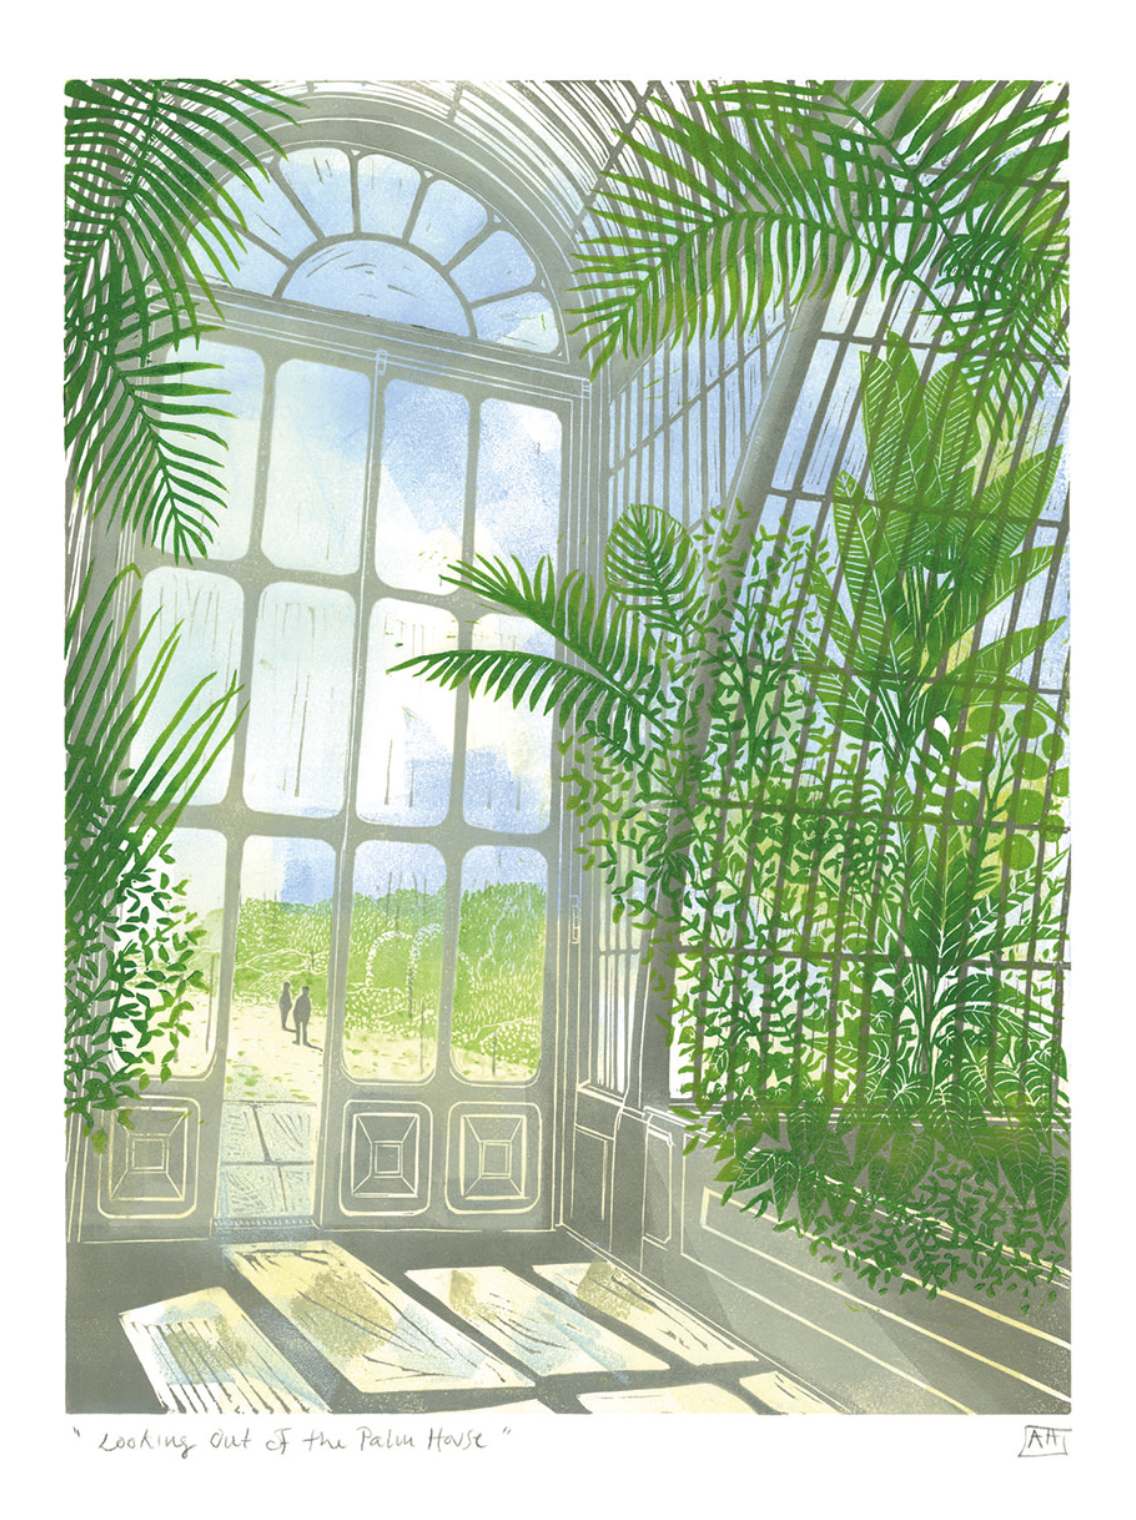 Looking Out of the Palm Greeting Card